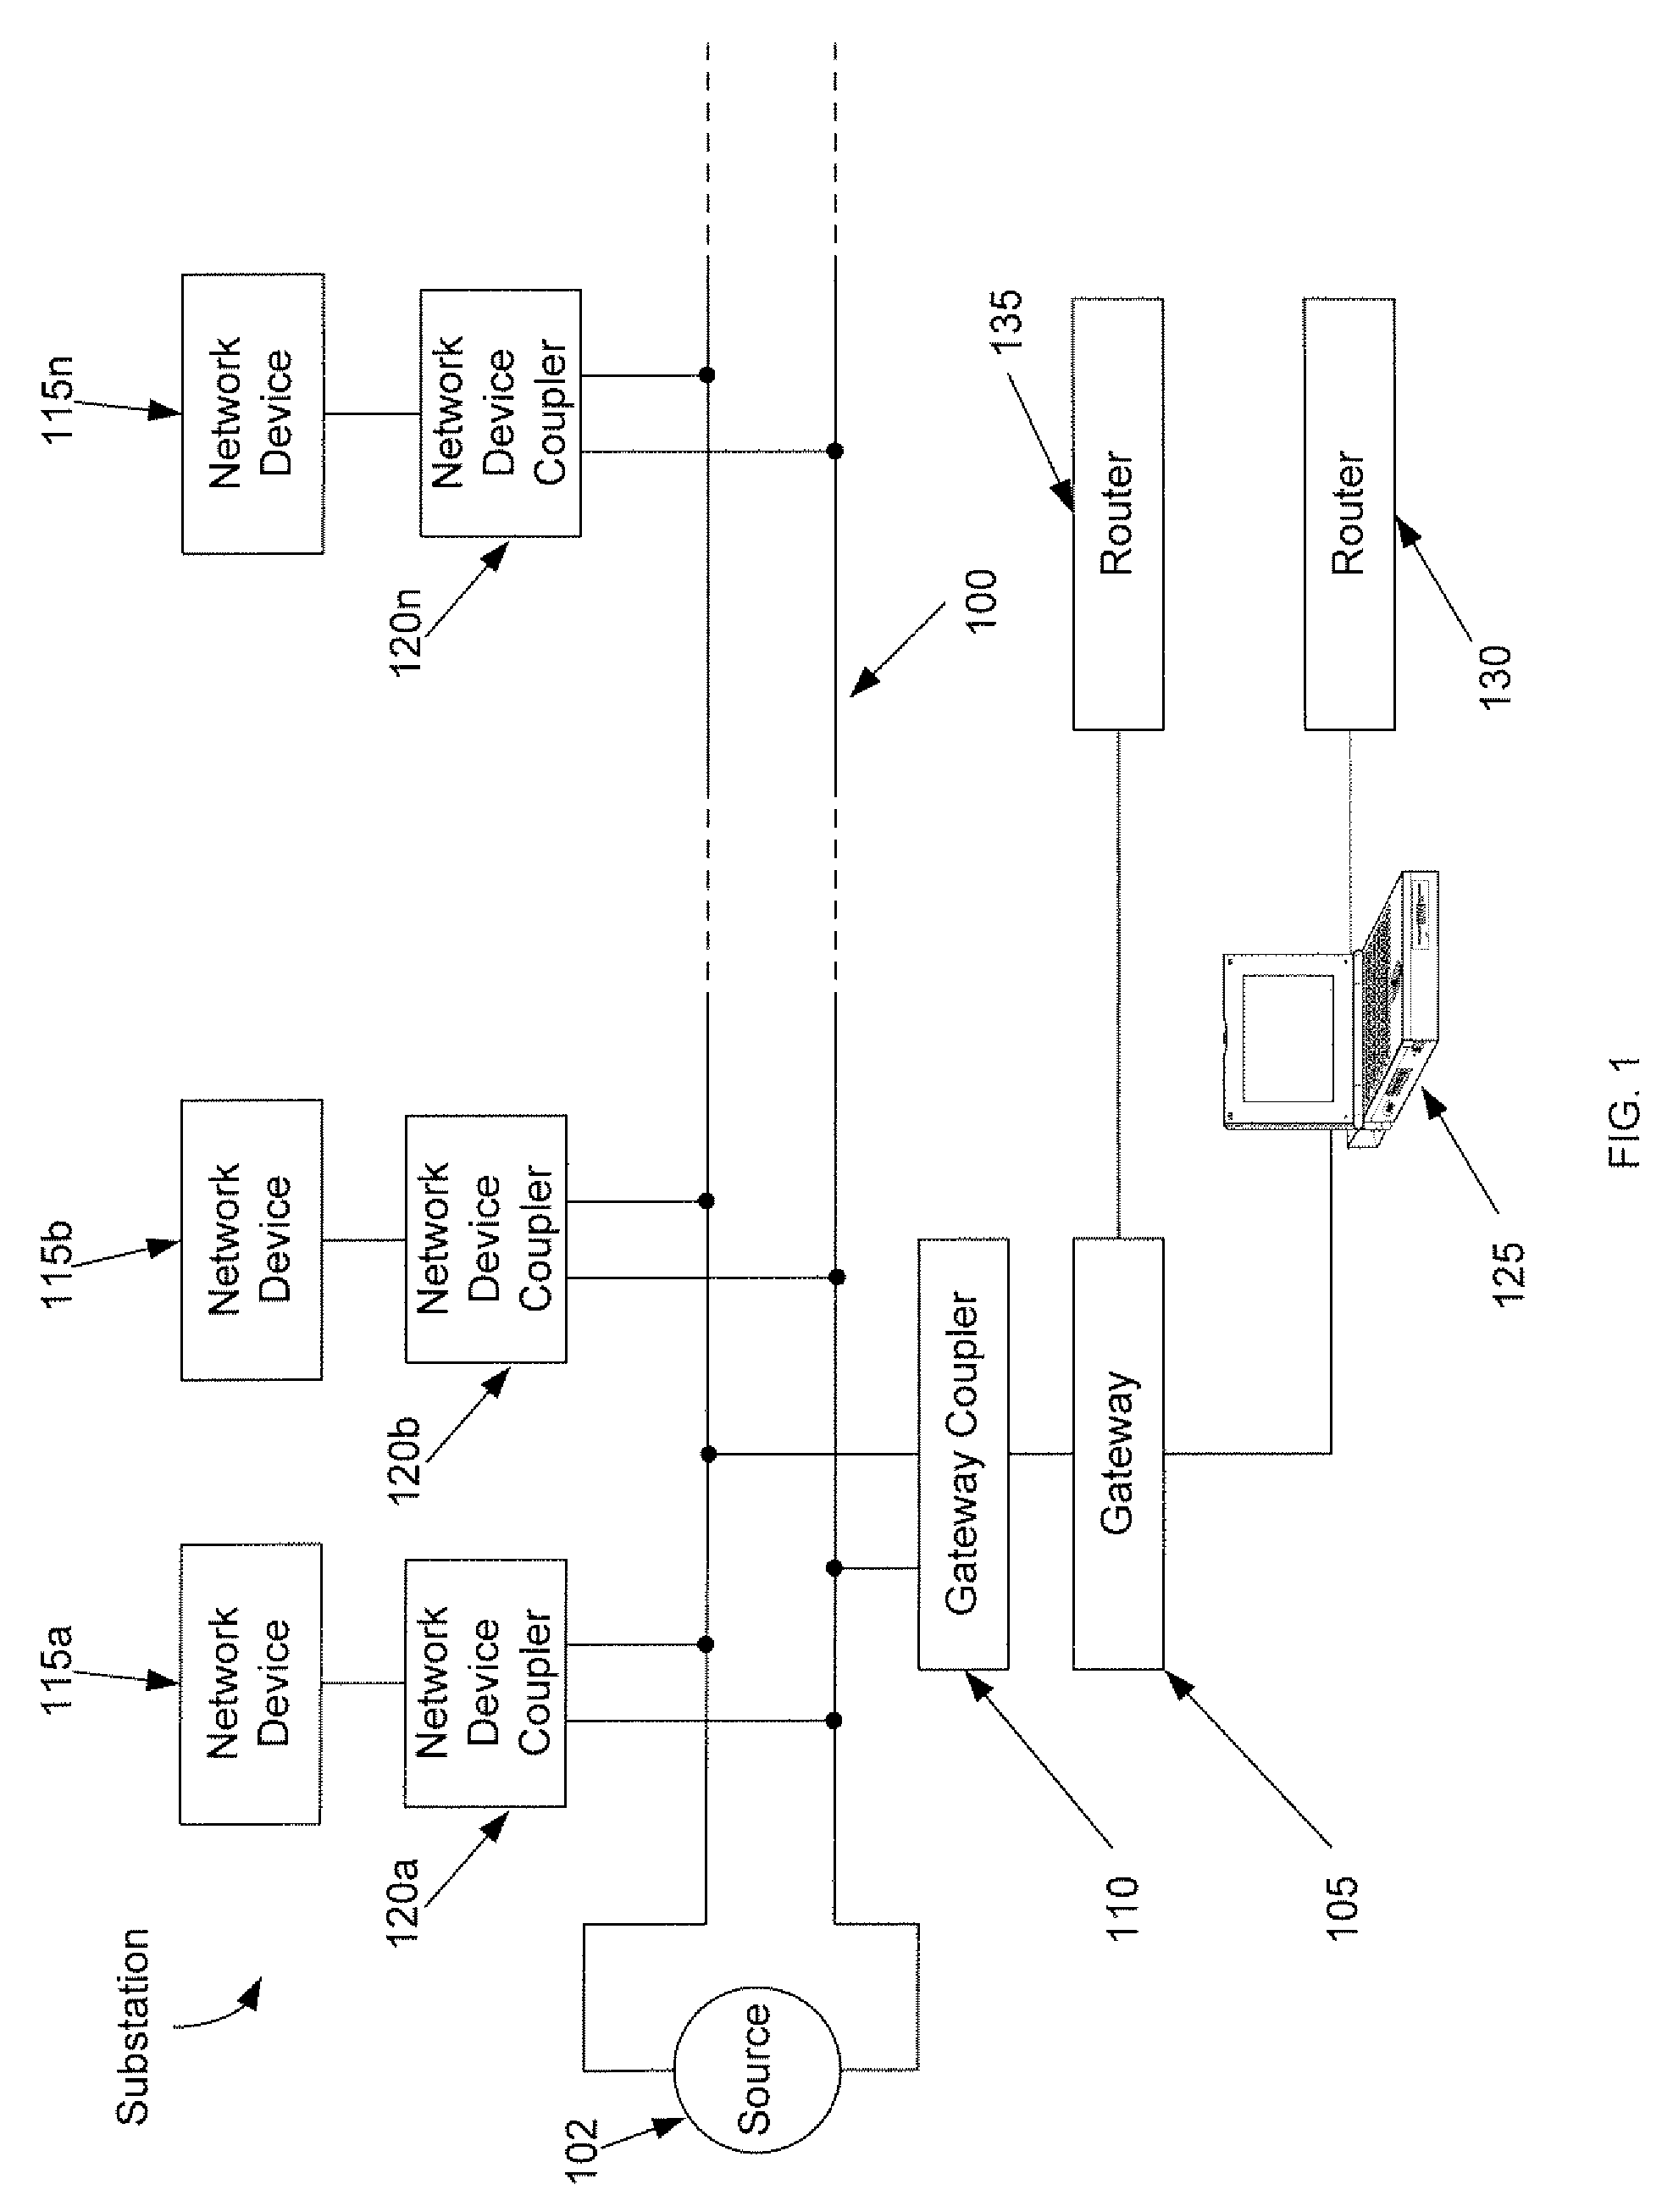 Systems and methods for establishing a network over a substation dc/ac circuit